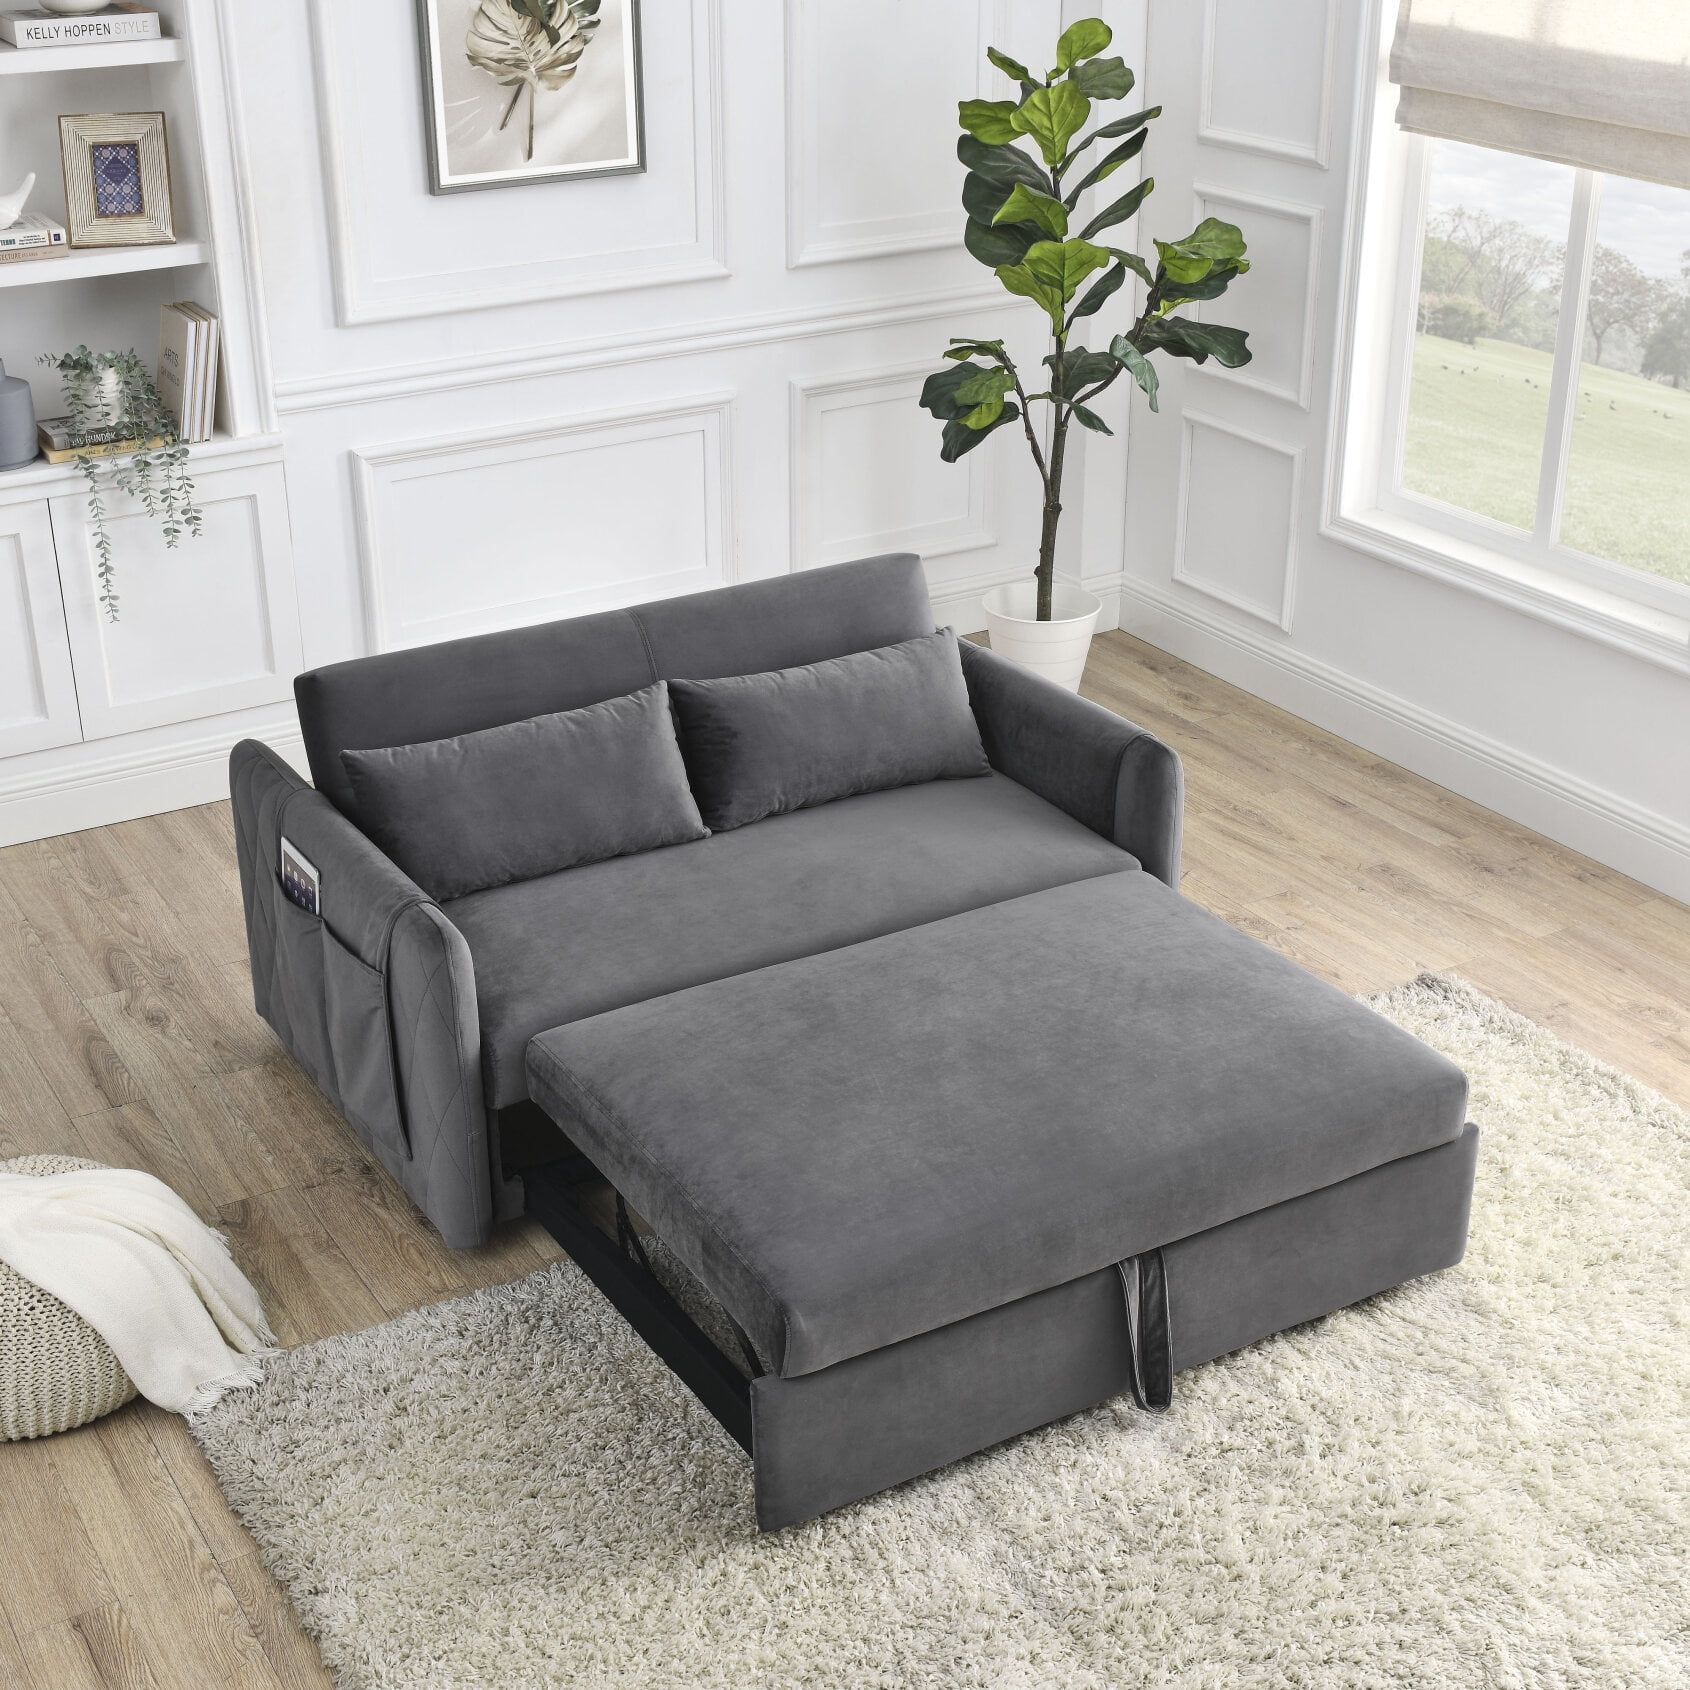 3 In 1 Convertible Sleeper Sofa Bed, Upholstered Pull Out Sofa With 2  Detachable Arm Pockets, Futon Sofa Bed With 2 Pillows And Adjustable  Backrest For Apartment Living Room – Walmart For 3 In 1 Gray Pull Out Sleeper Sofas (View 11 of 15)